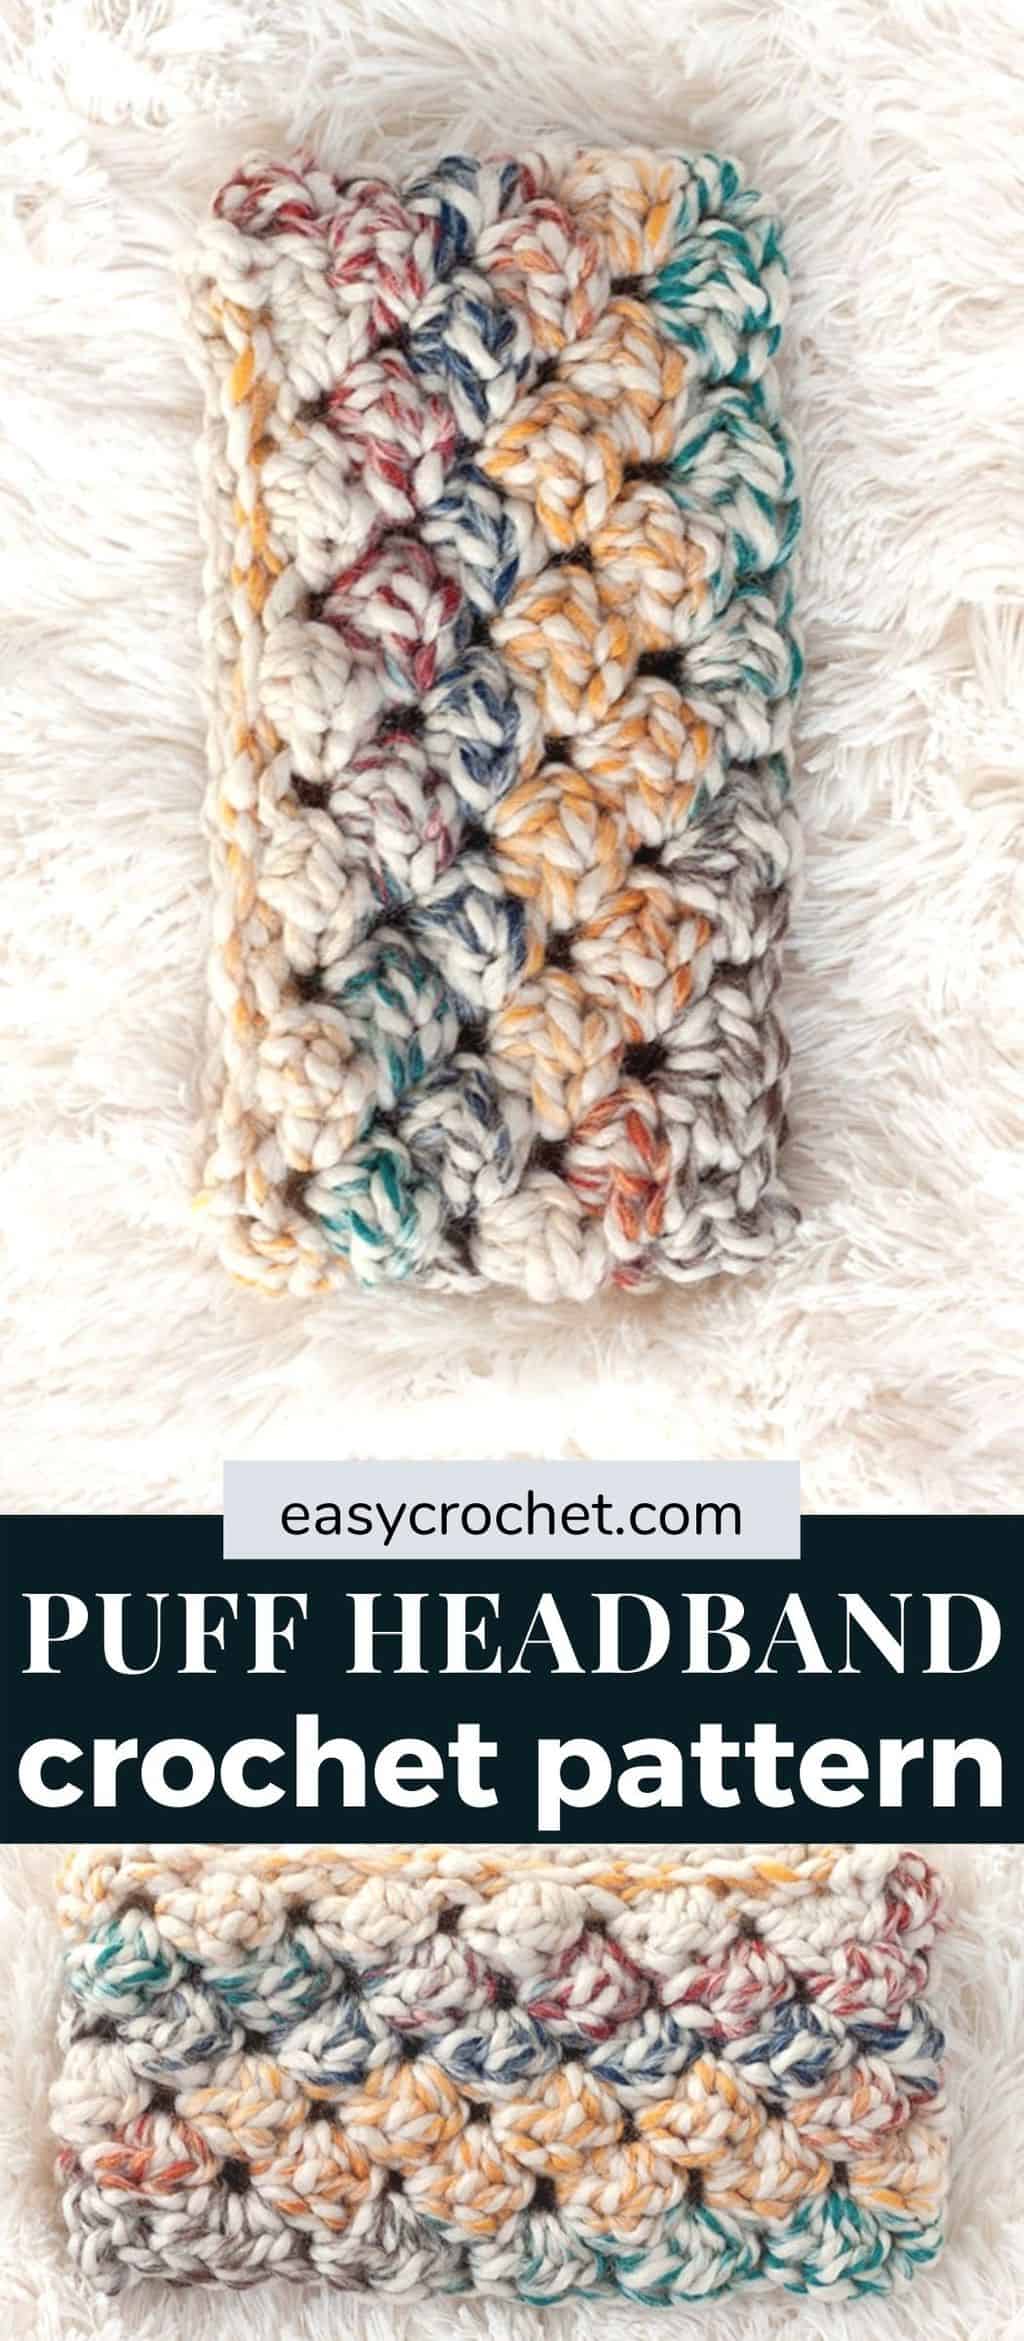 Puffed Headband Crochet Pattern that is simple and fun to make! Perfect to keep you cozy warm during the cool weather months! via @easycrochetcom